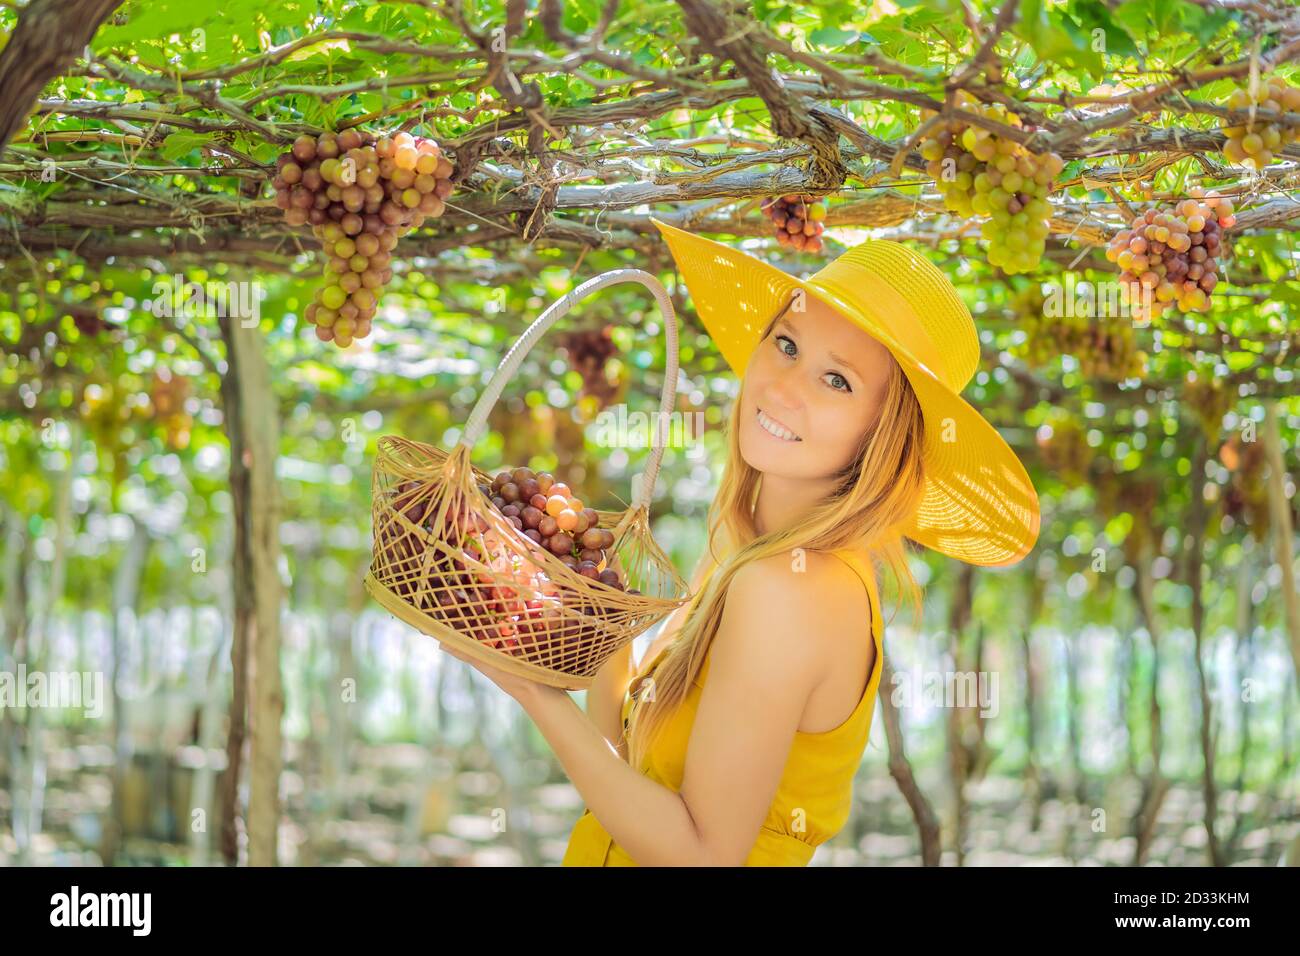 Happy smiling woman with red grapes harvest in basket, sunset vineyard background Stock Photo